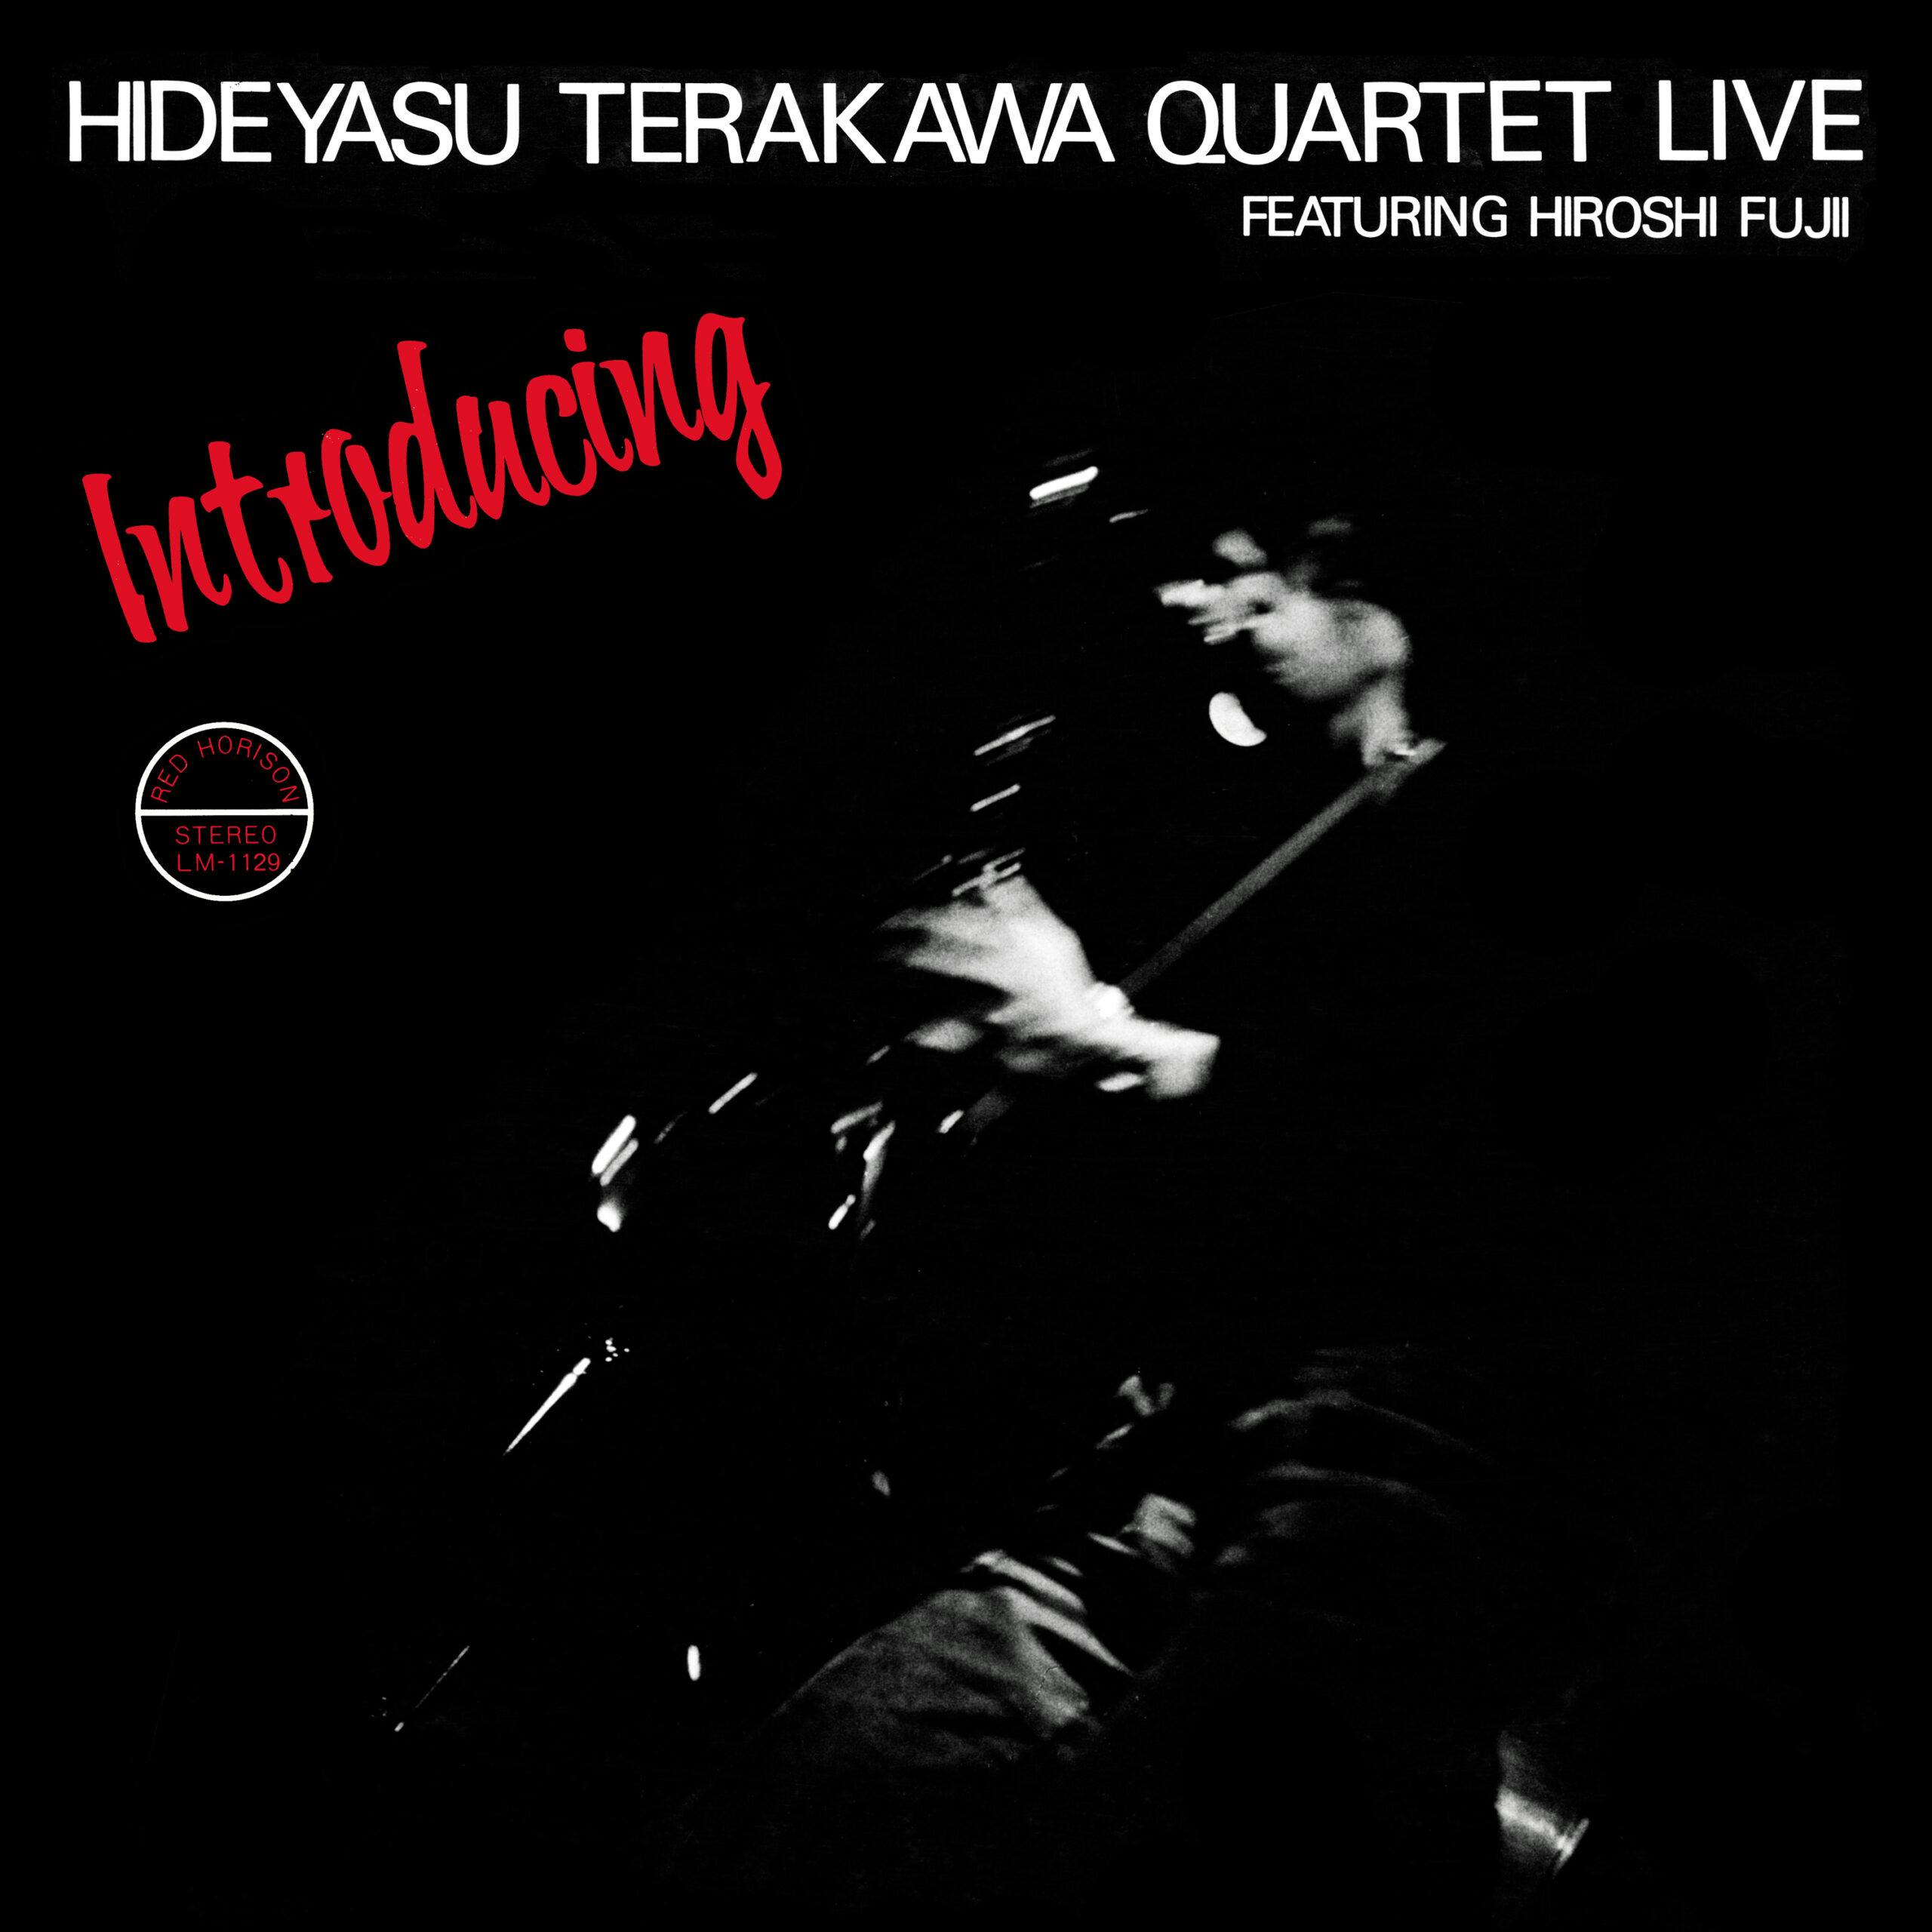 In the finest tradition of BBE Music’s J Jazz Masterclass Series, we have a real obscurity of quality to savour. Taken from the rare 1978 private press album ‘Introducing’ by the Hideyasu Terakawa Quartet featuring Hiroshi Fujii, this private press gig recording was originally released in less than 100 copies. This BBE Music edition is the first time this very rare album has ever been reissued.